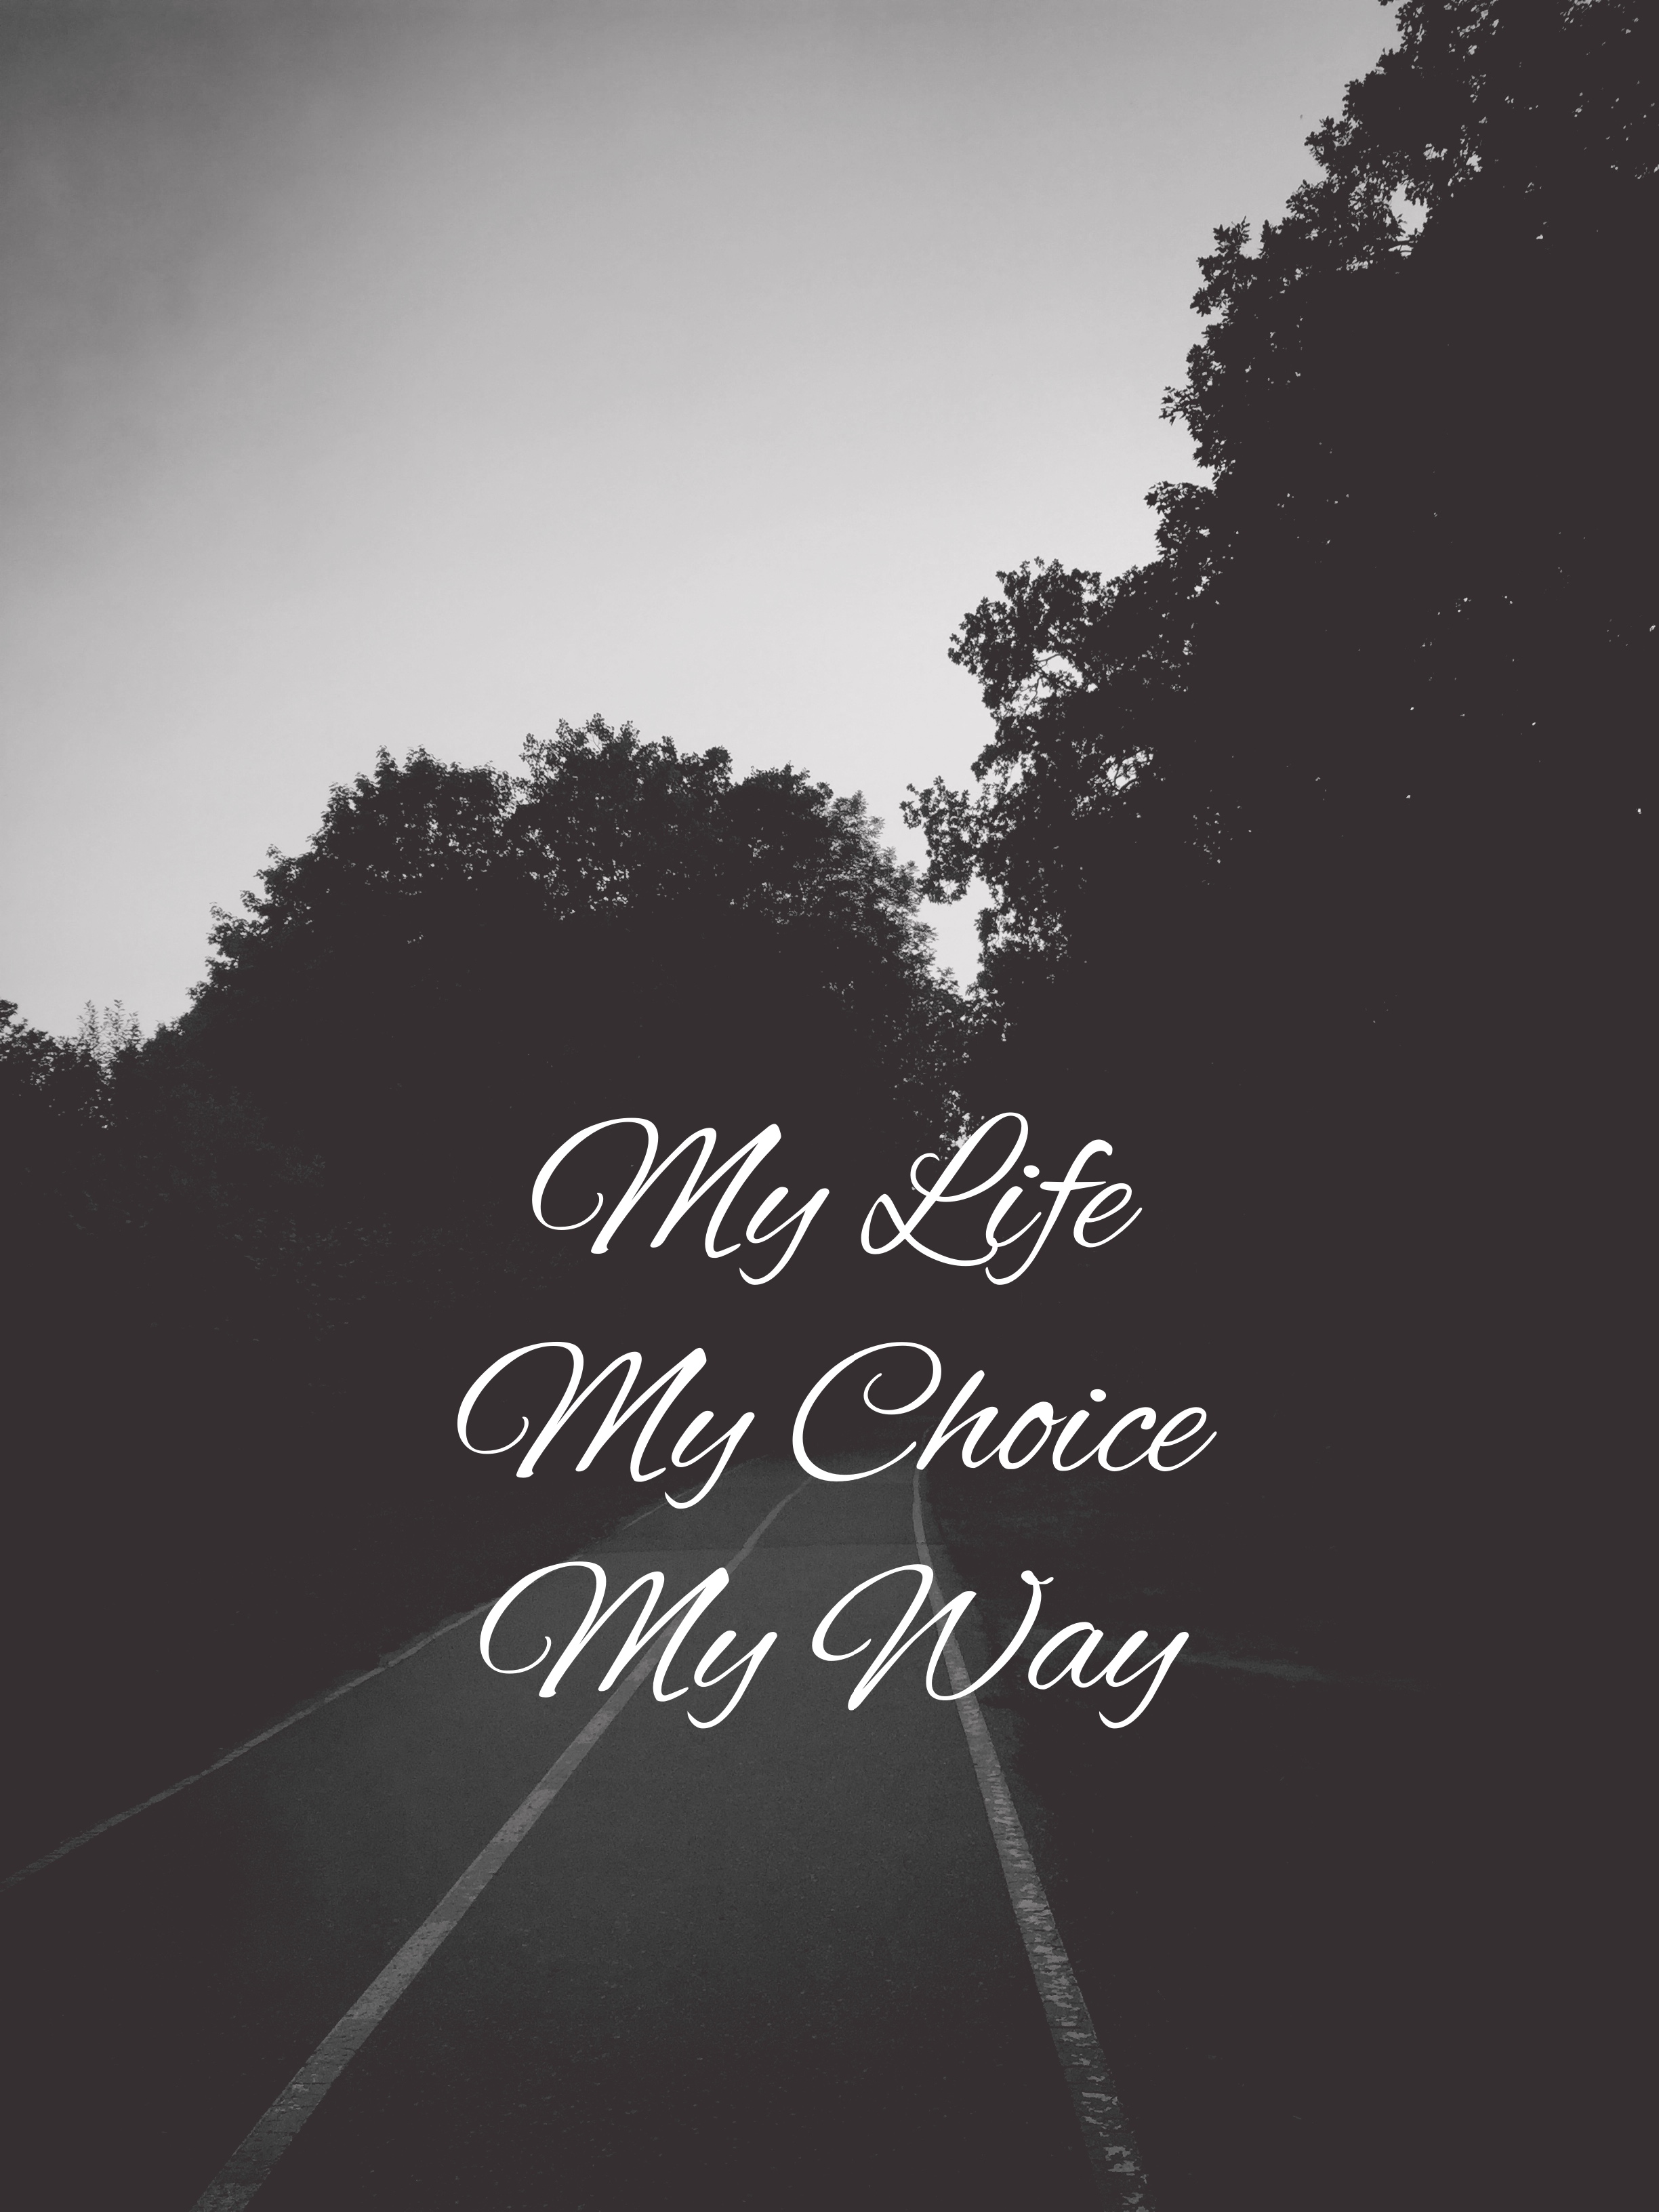 bw, words, text, quotation, quote, chb, inscription, road, path, way Phone Background